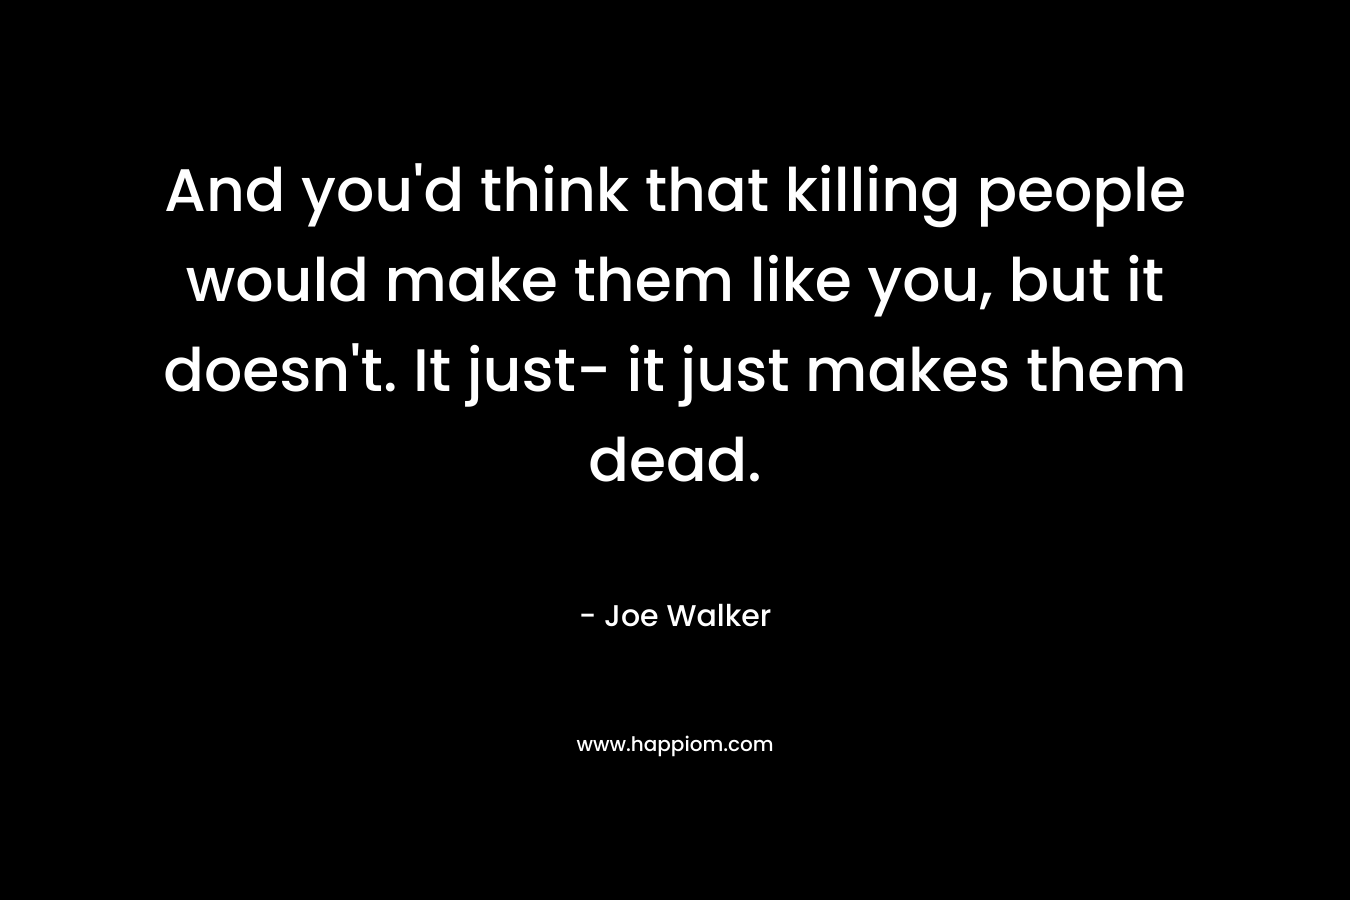 And you'd think that killing people would make them like you, but it doesn't. It just- it just makes them dead.